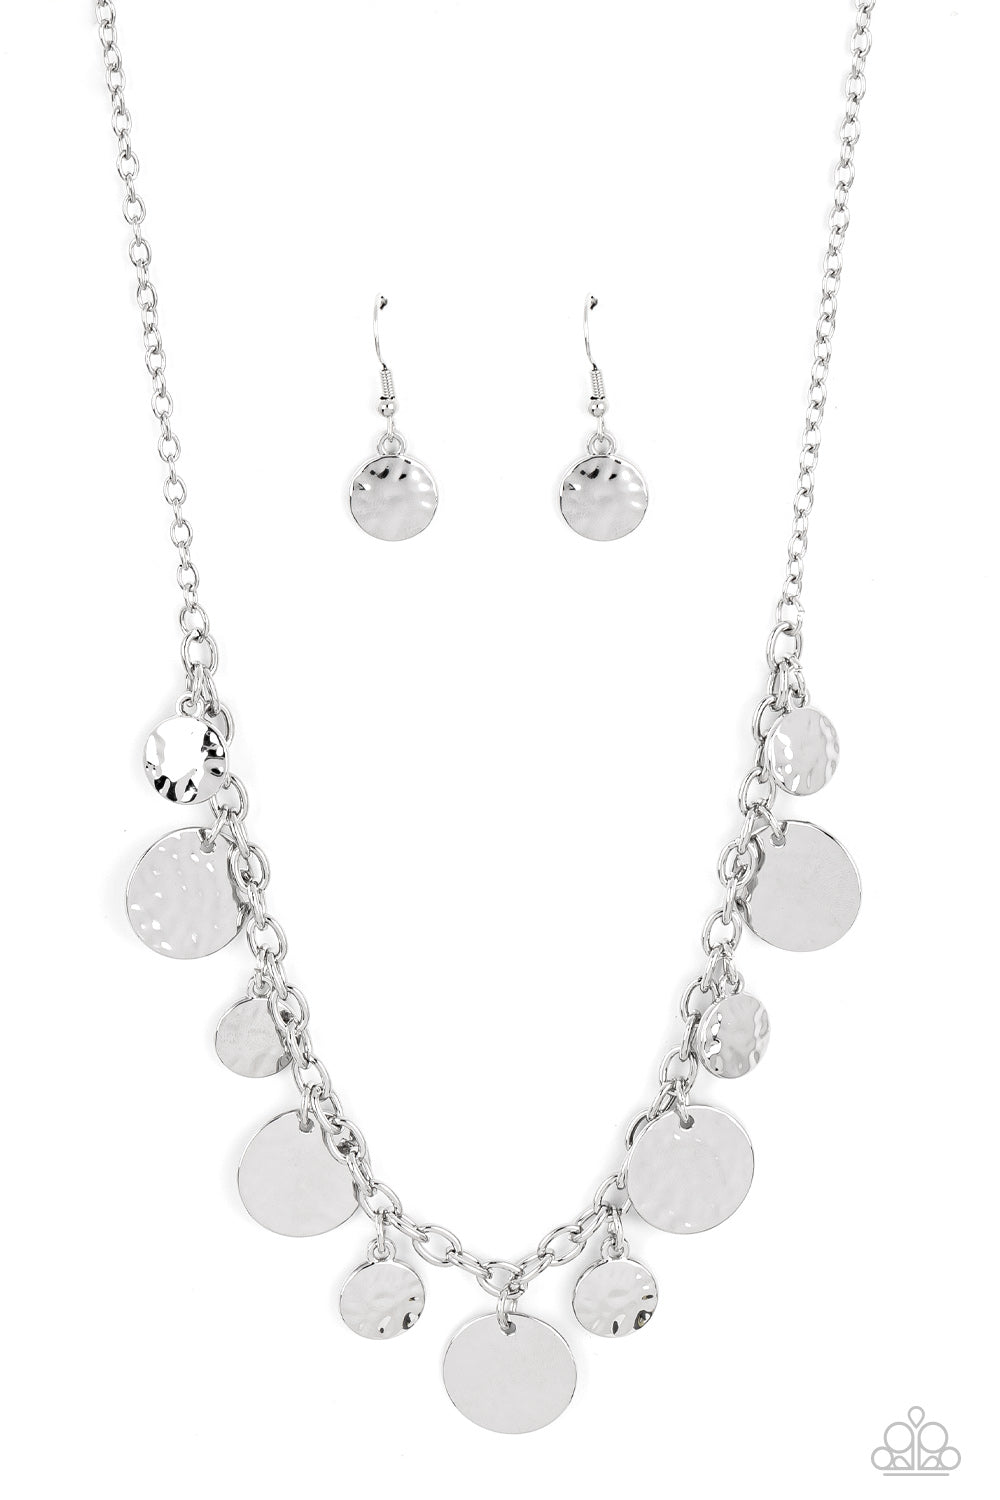 Model Medallions Paparazzi Accessories Necklace with Earrings Silver